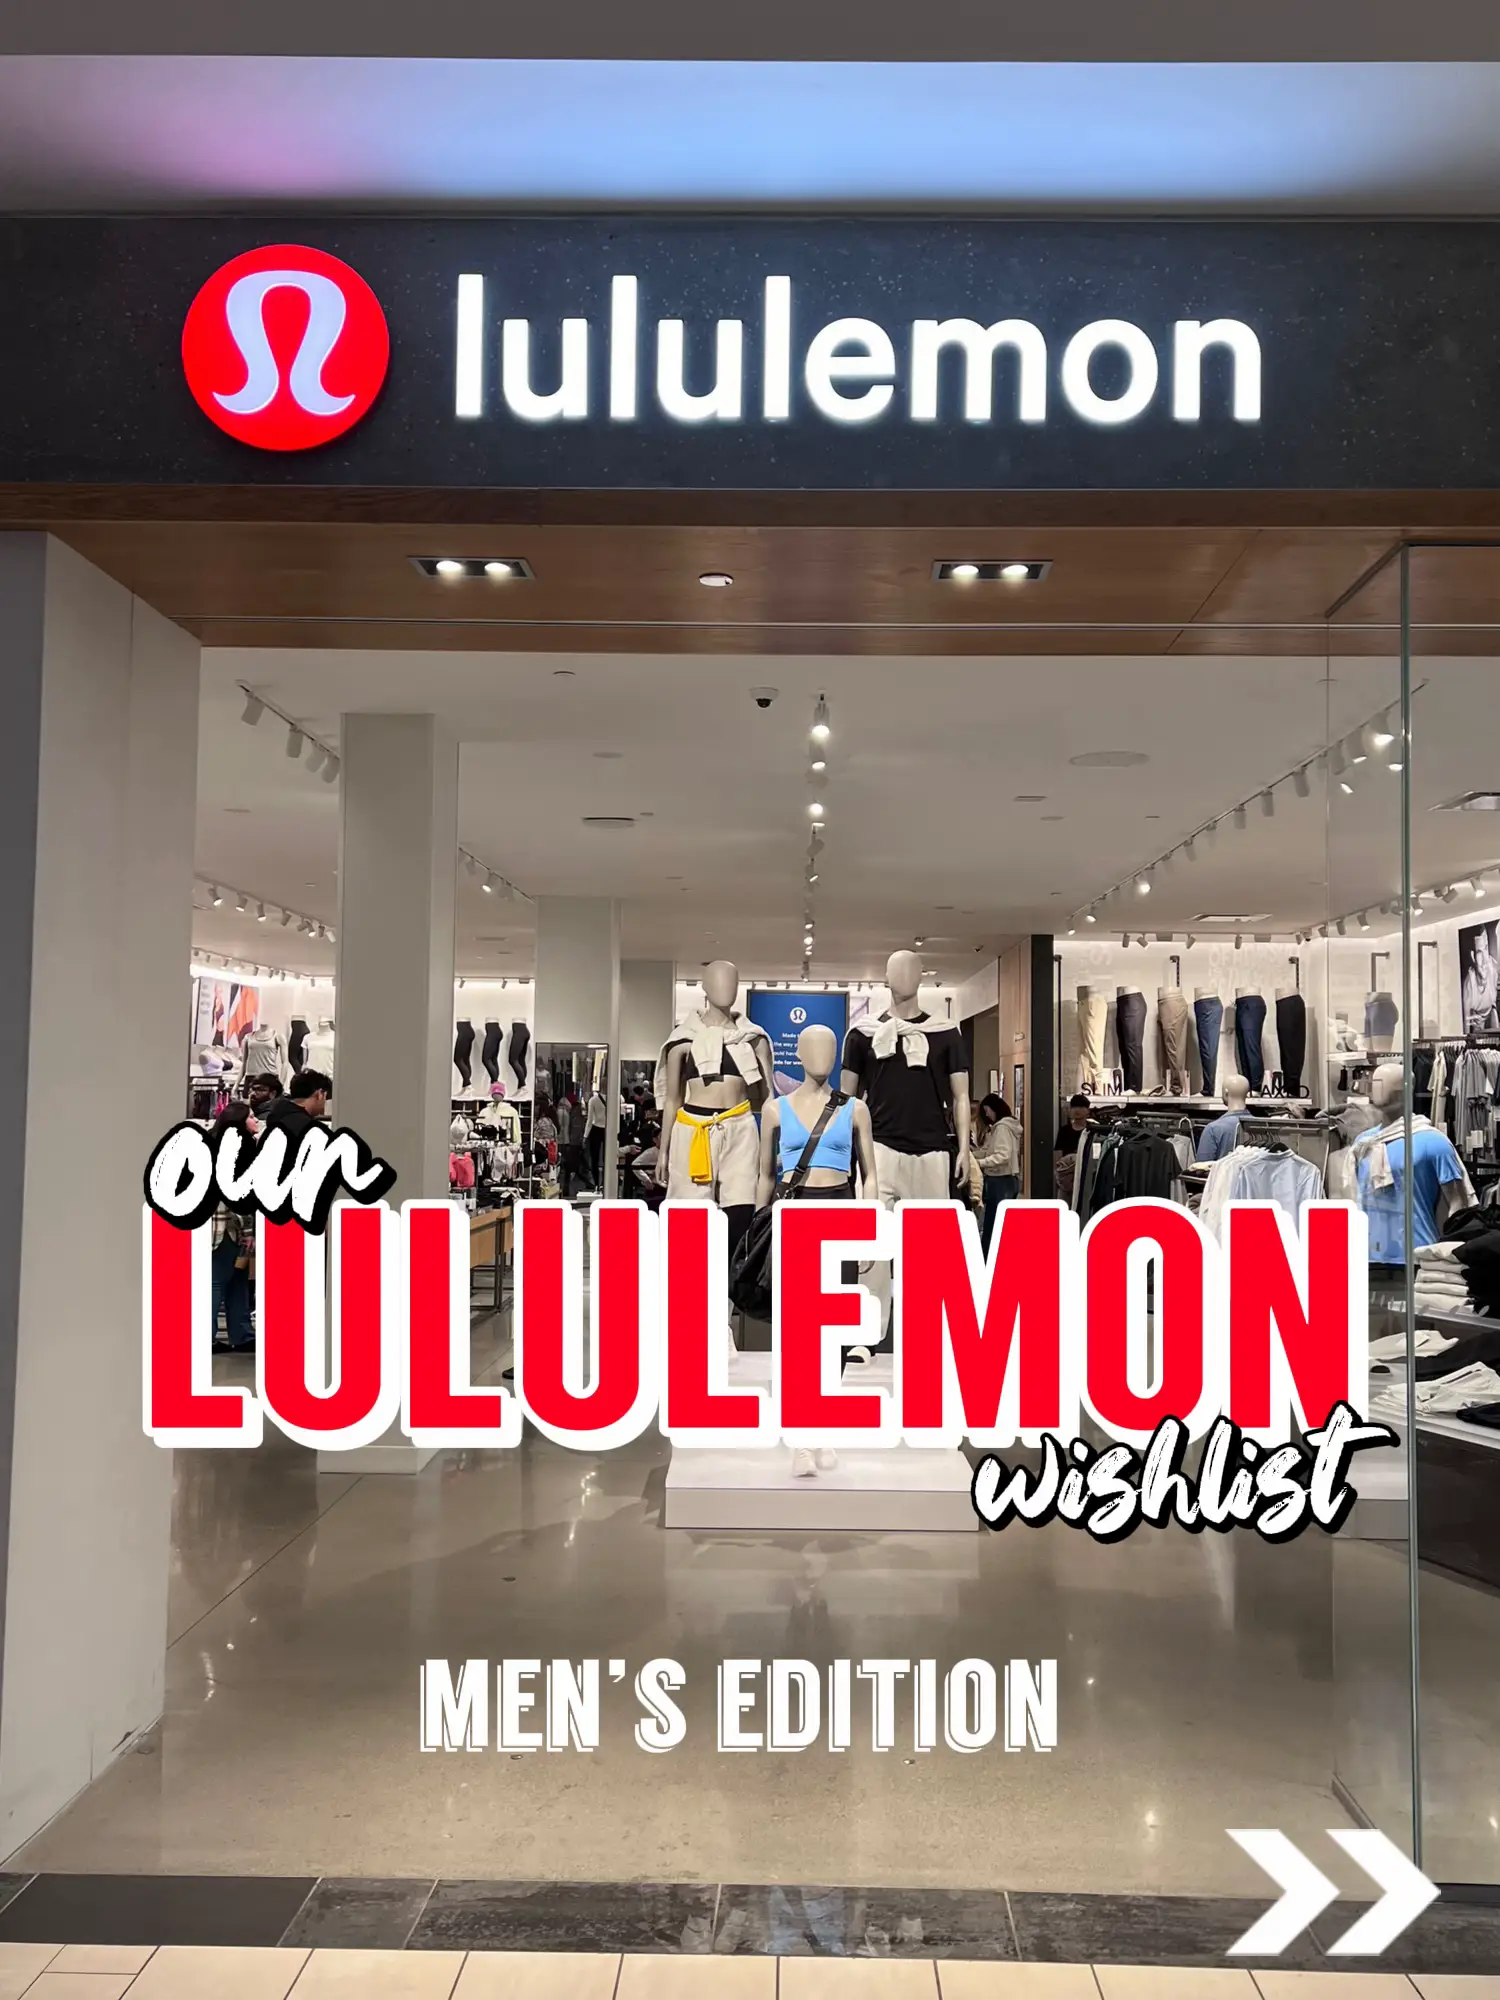 LEGO Micro @lululemon Store! Looking to build more retail concepts